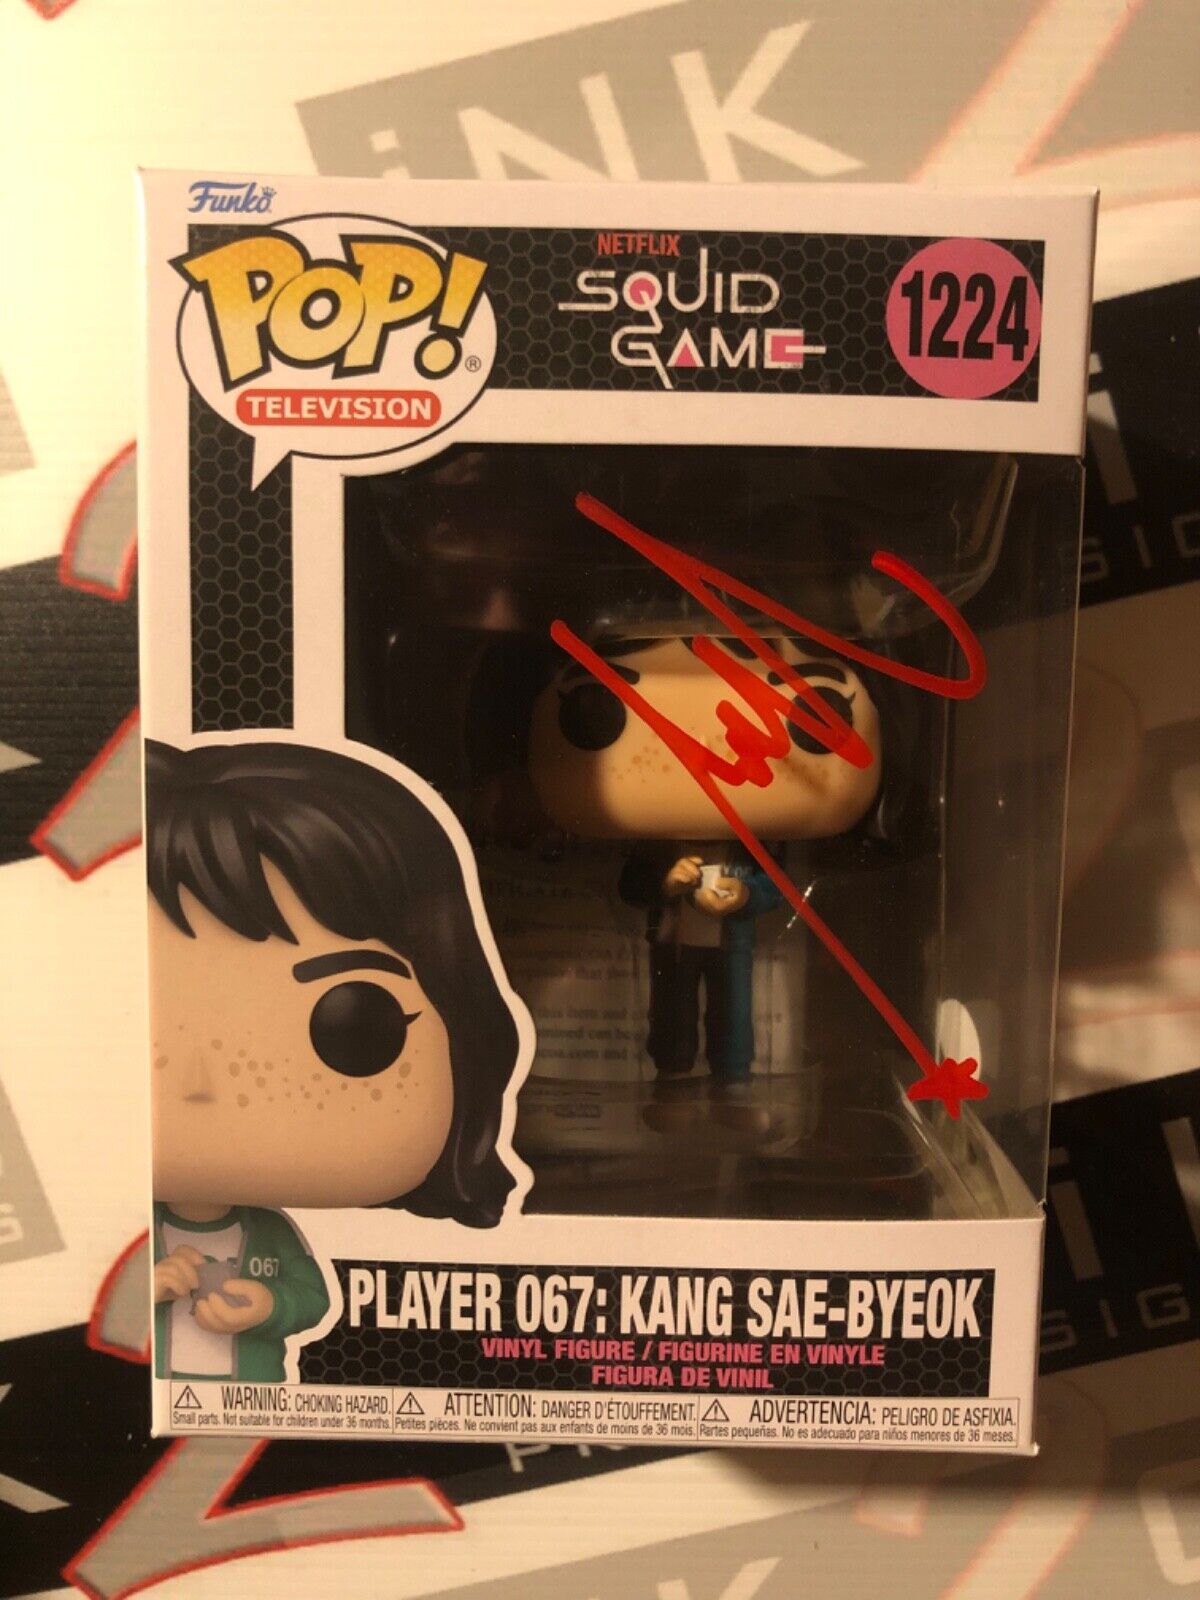 Squid Game Player 067 Kang Sae Funko Pop signed by Jung Ho-yeon Autograph ACOA